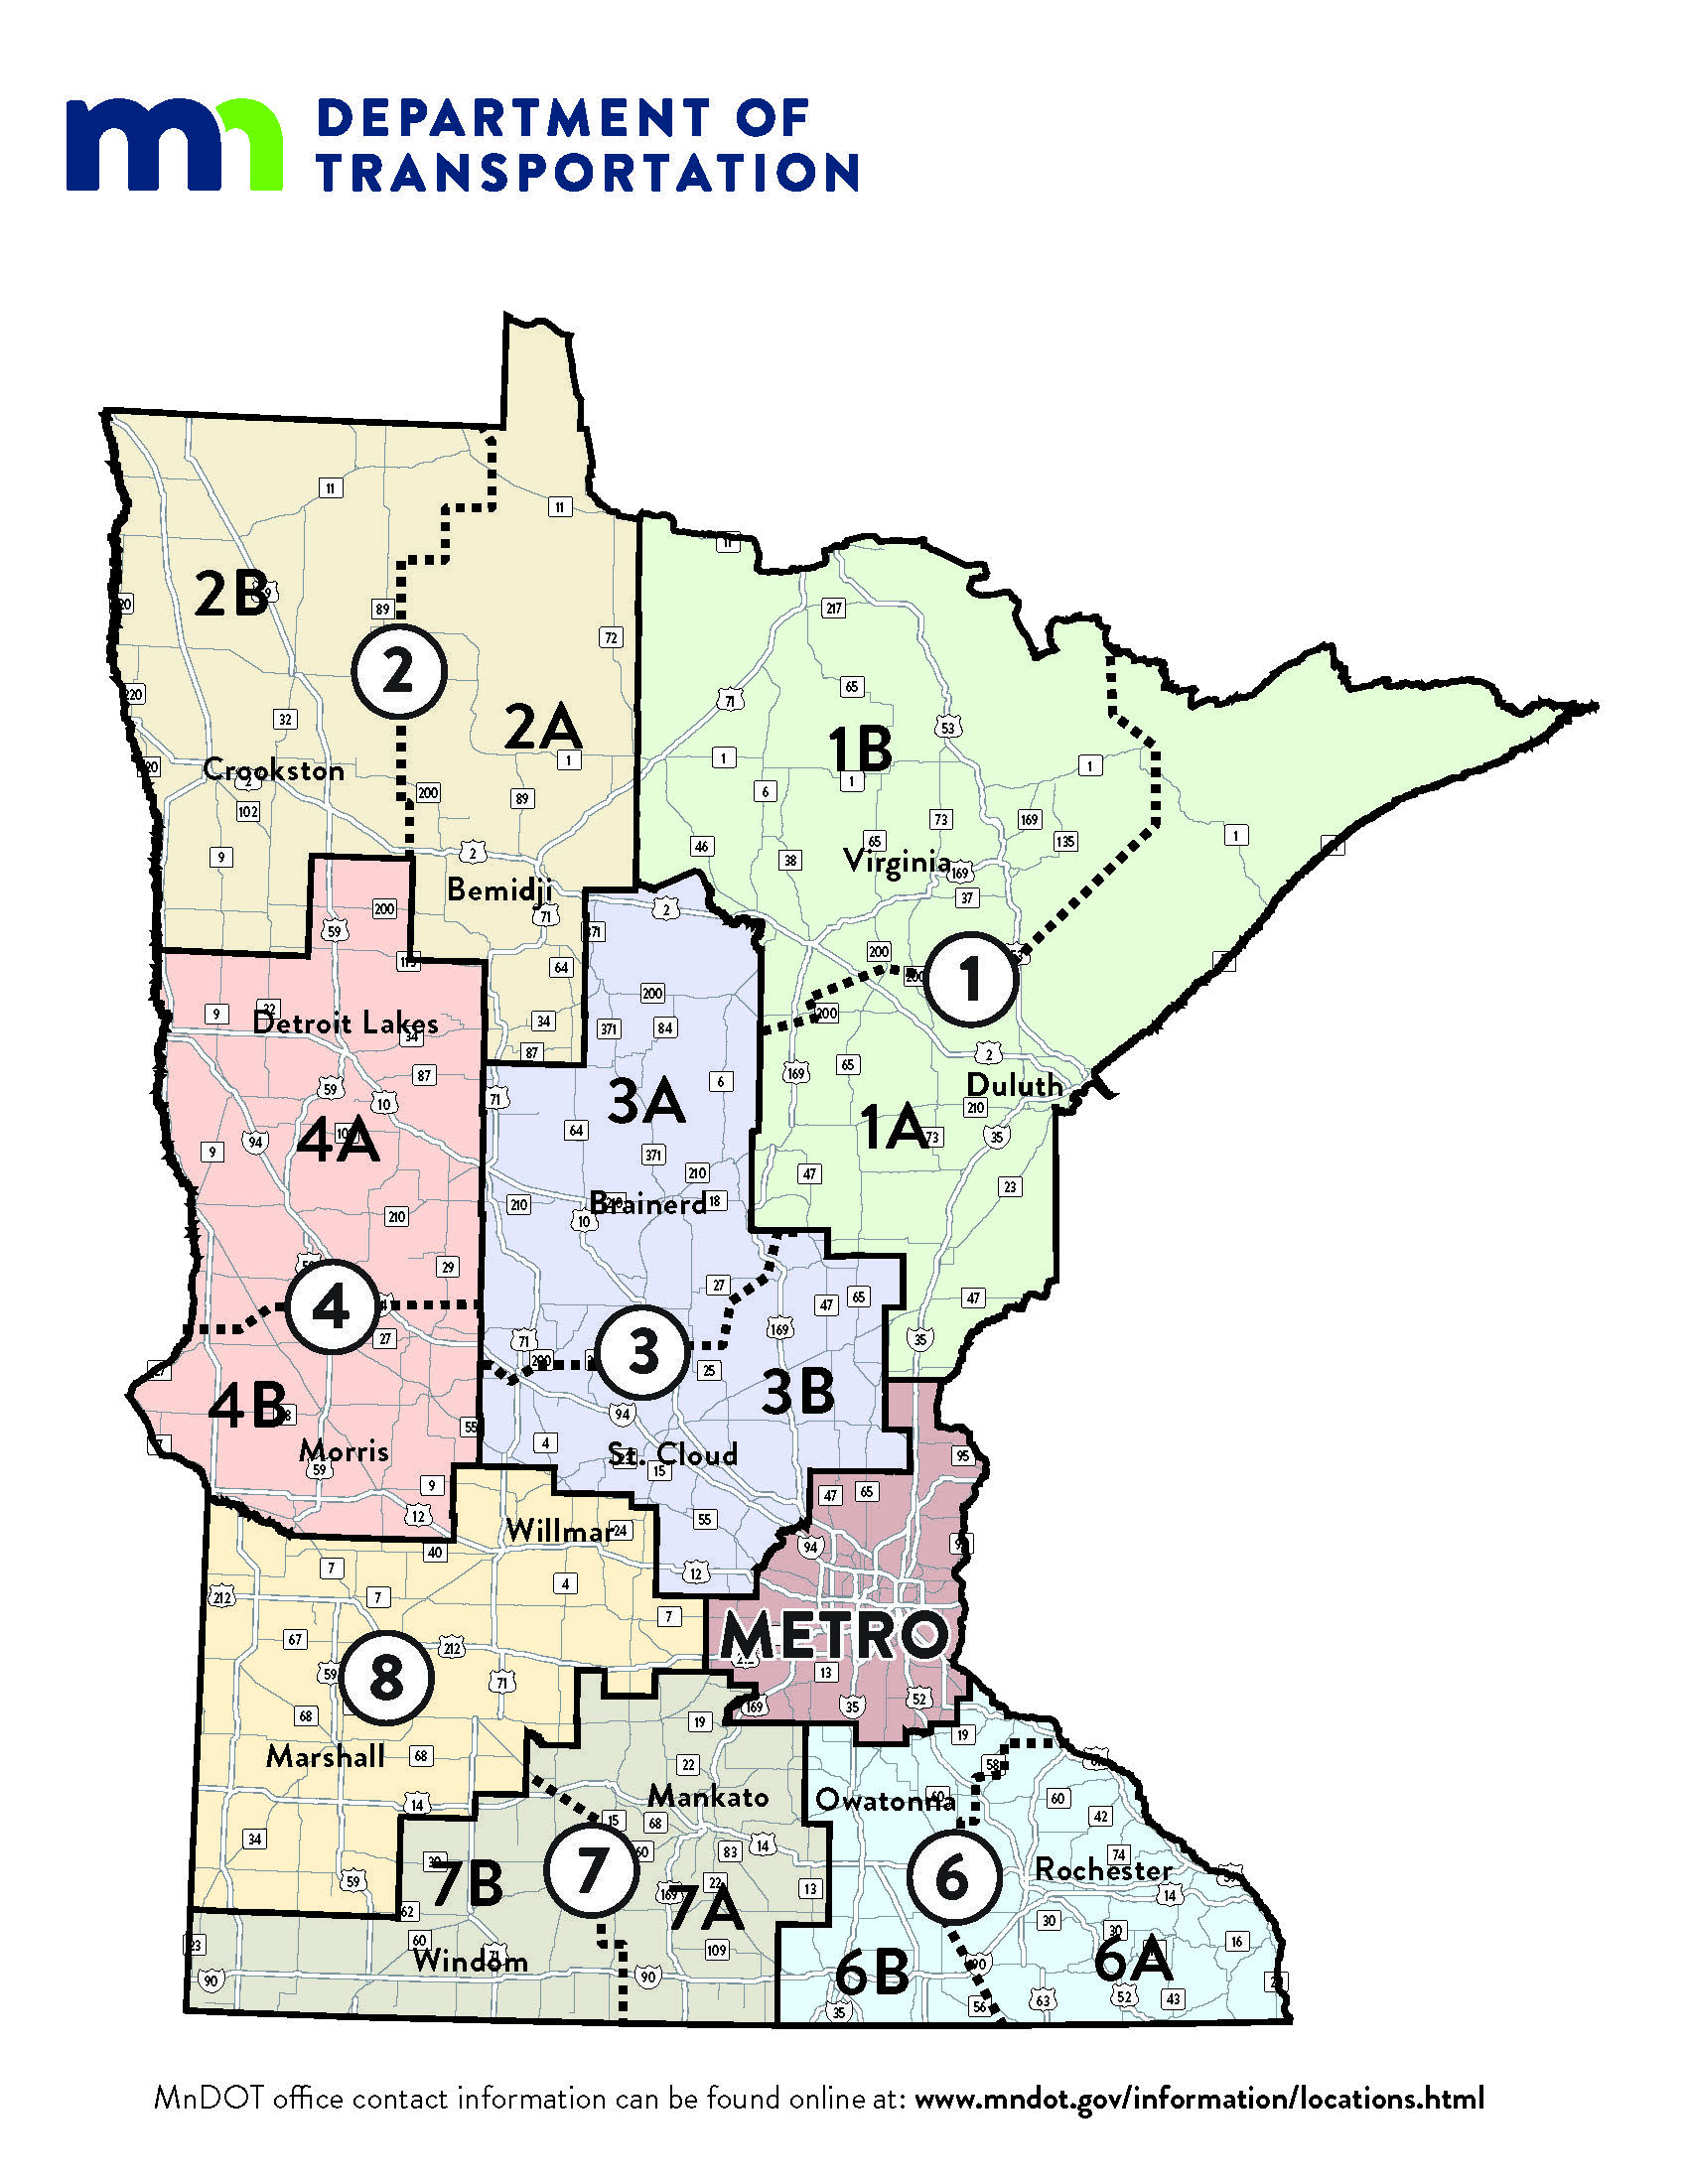 MnDOT districts and the trunk highway system